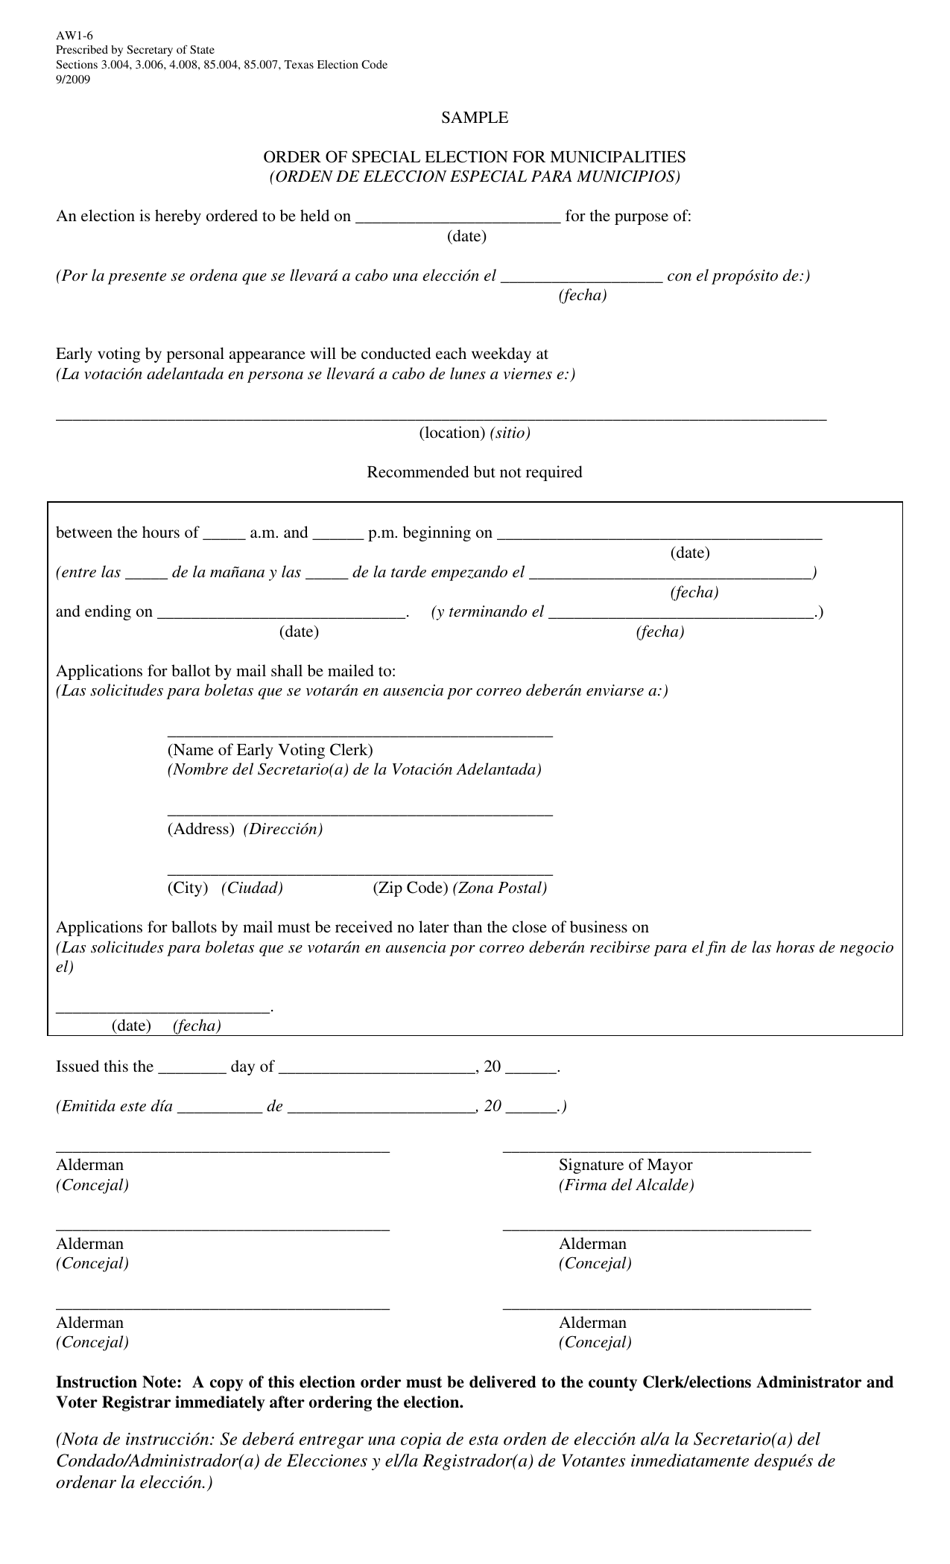 Form AW1-6 Order of Special Election for Municipalities - Texas (English / Spanish), Page 1